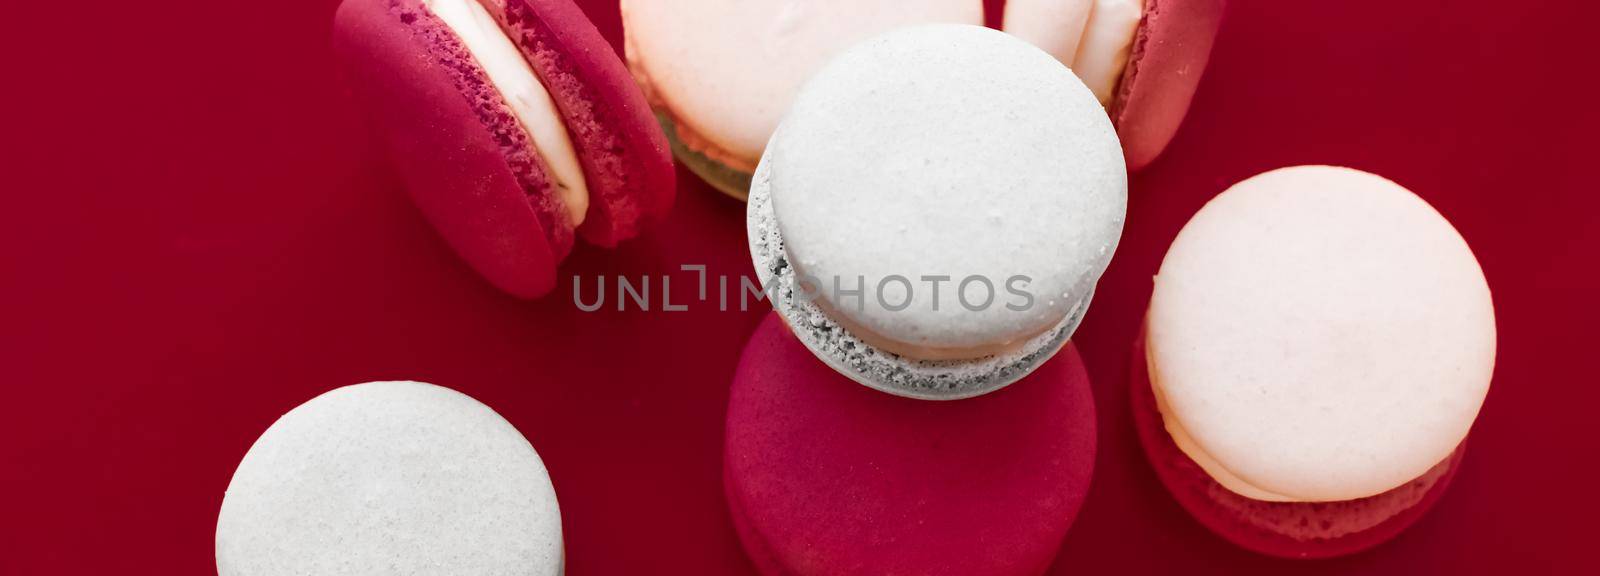 French macaroons on wine red background, parisian chic cafe dessert, sweet food and cake macaron for luxury confectionery brand, holiday backdrop design by Anneleven